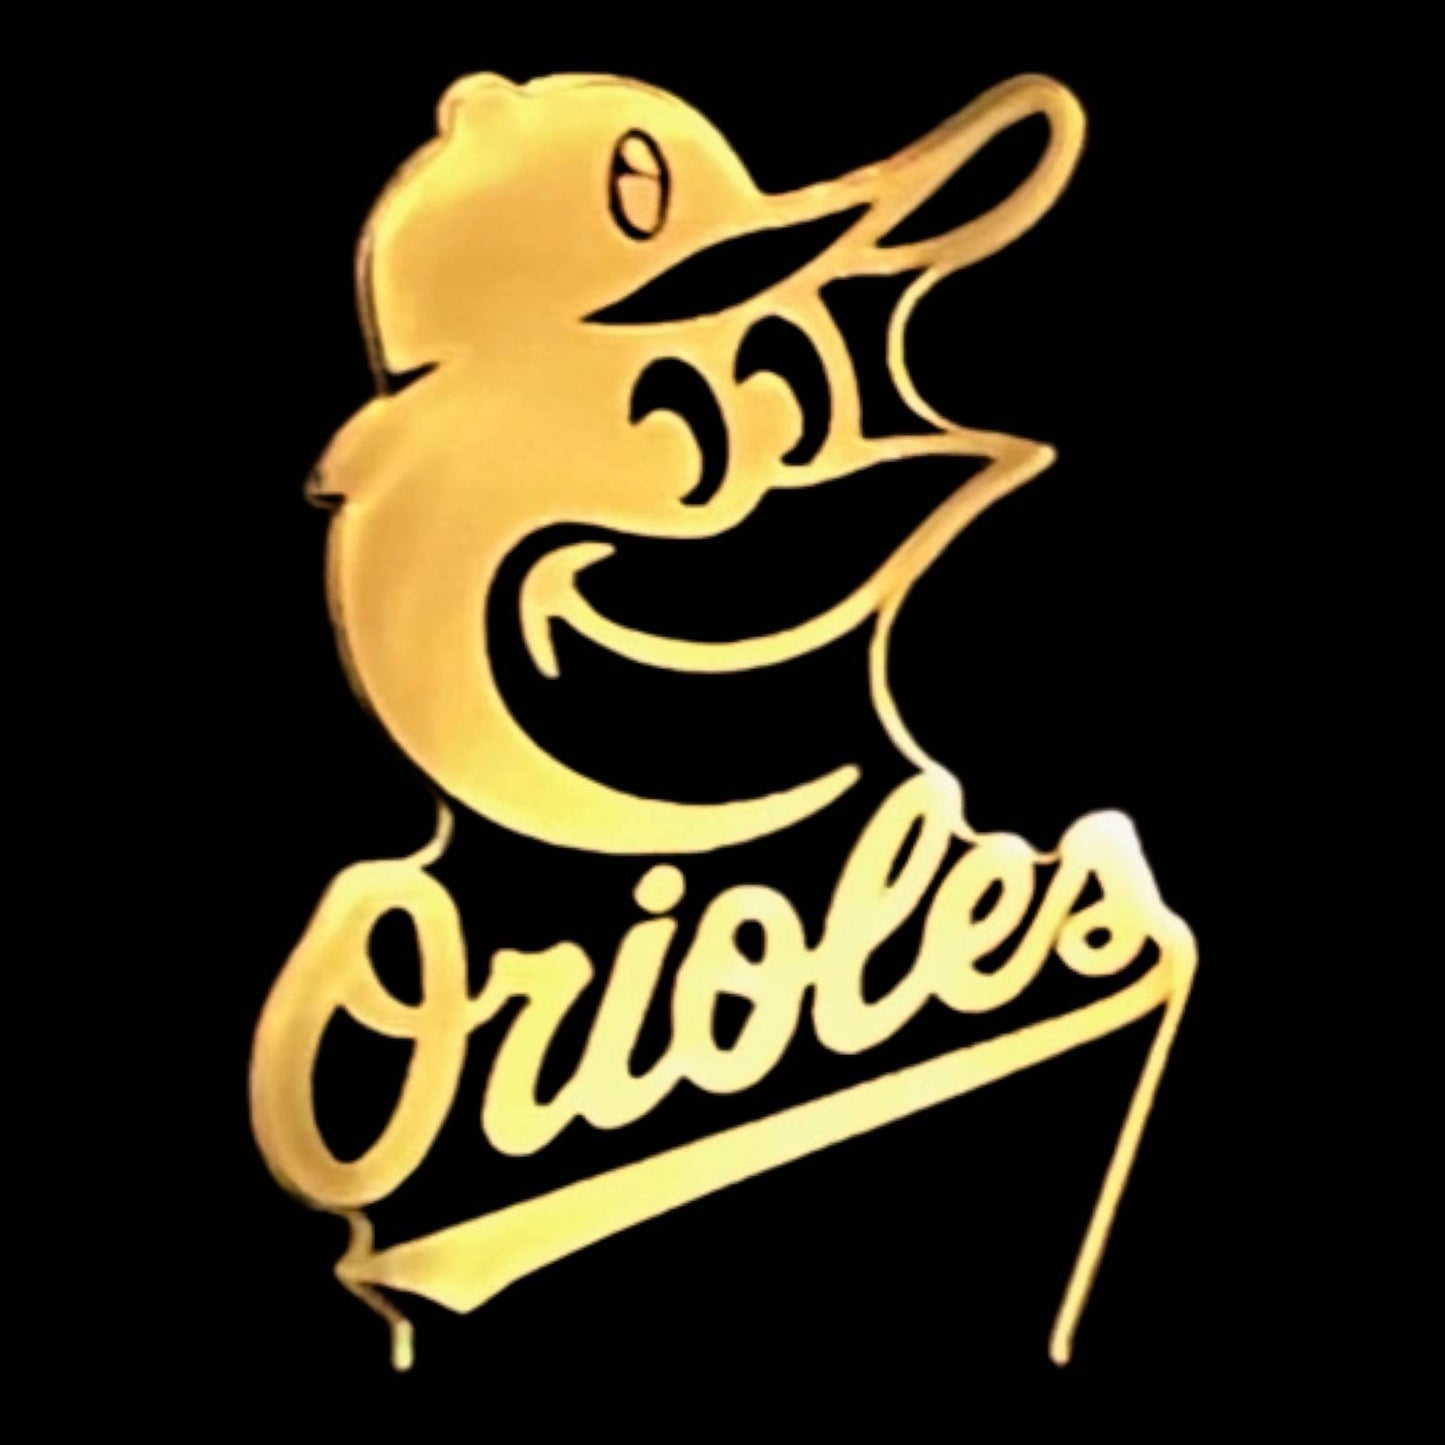 Baltimore Orioles 3D LED Night-Light 7 Color Changing Lamp w/ Touch Switch